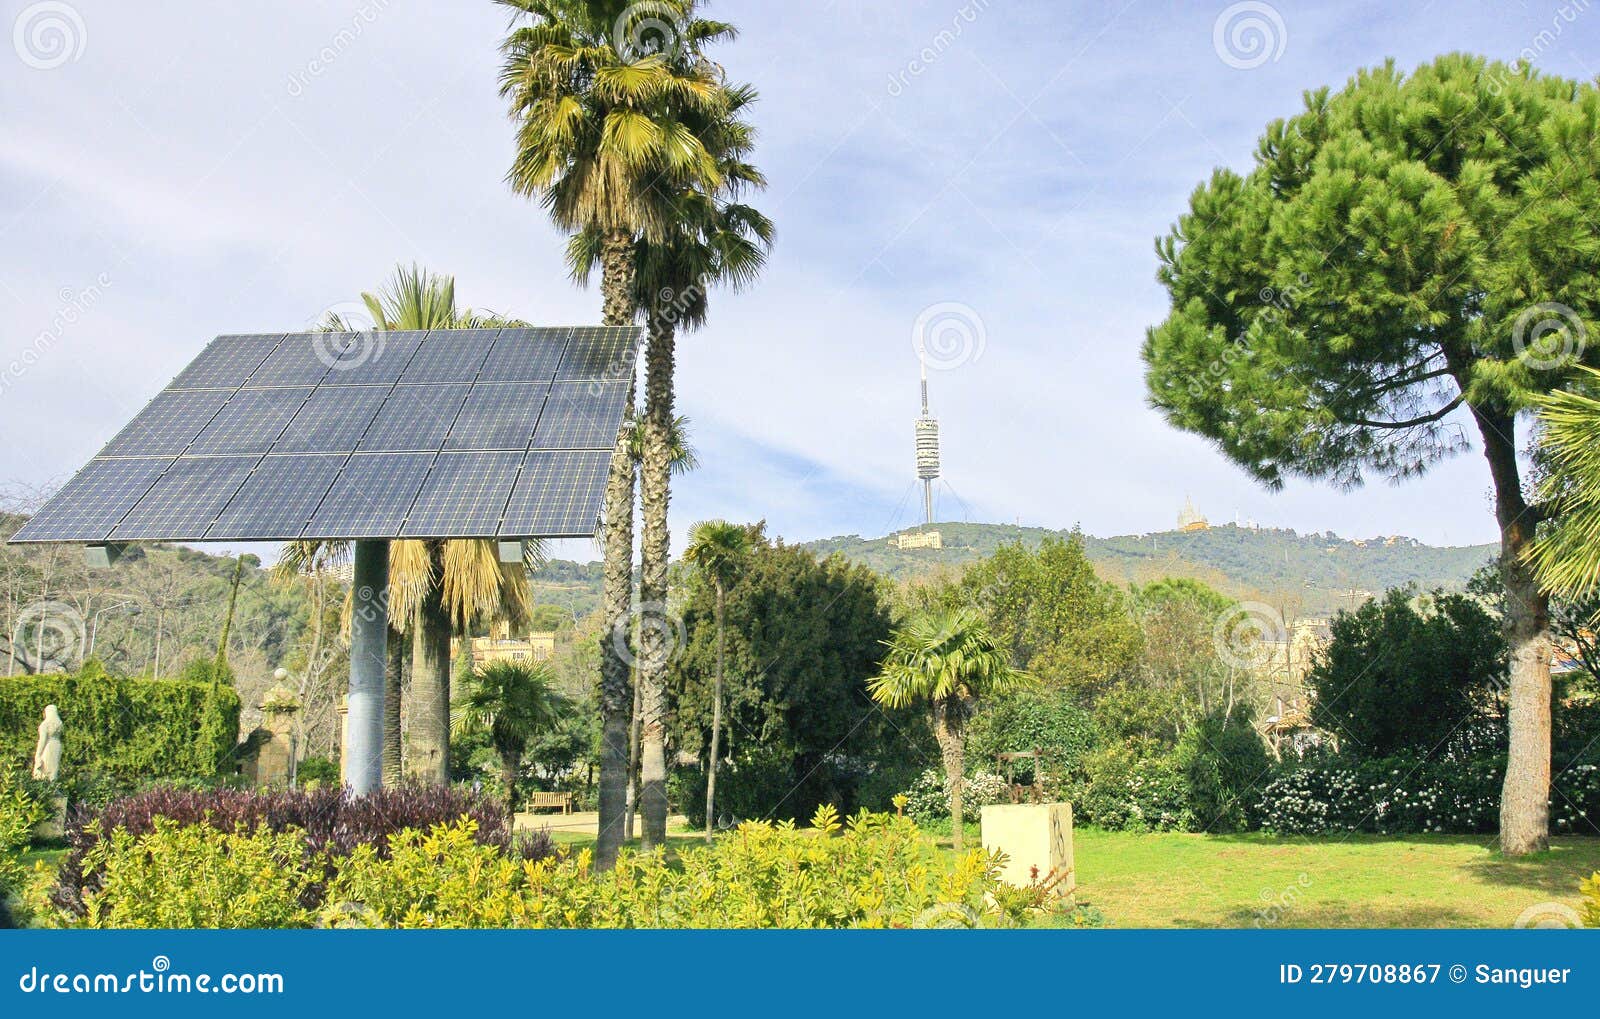 solar panel in the gardens of can sentmenat in barcelona